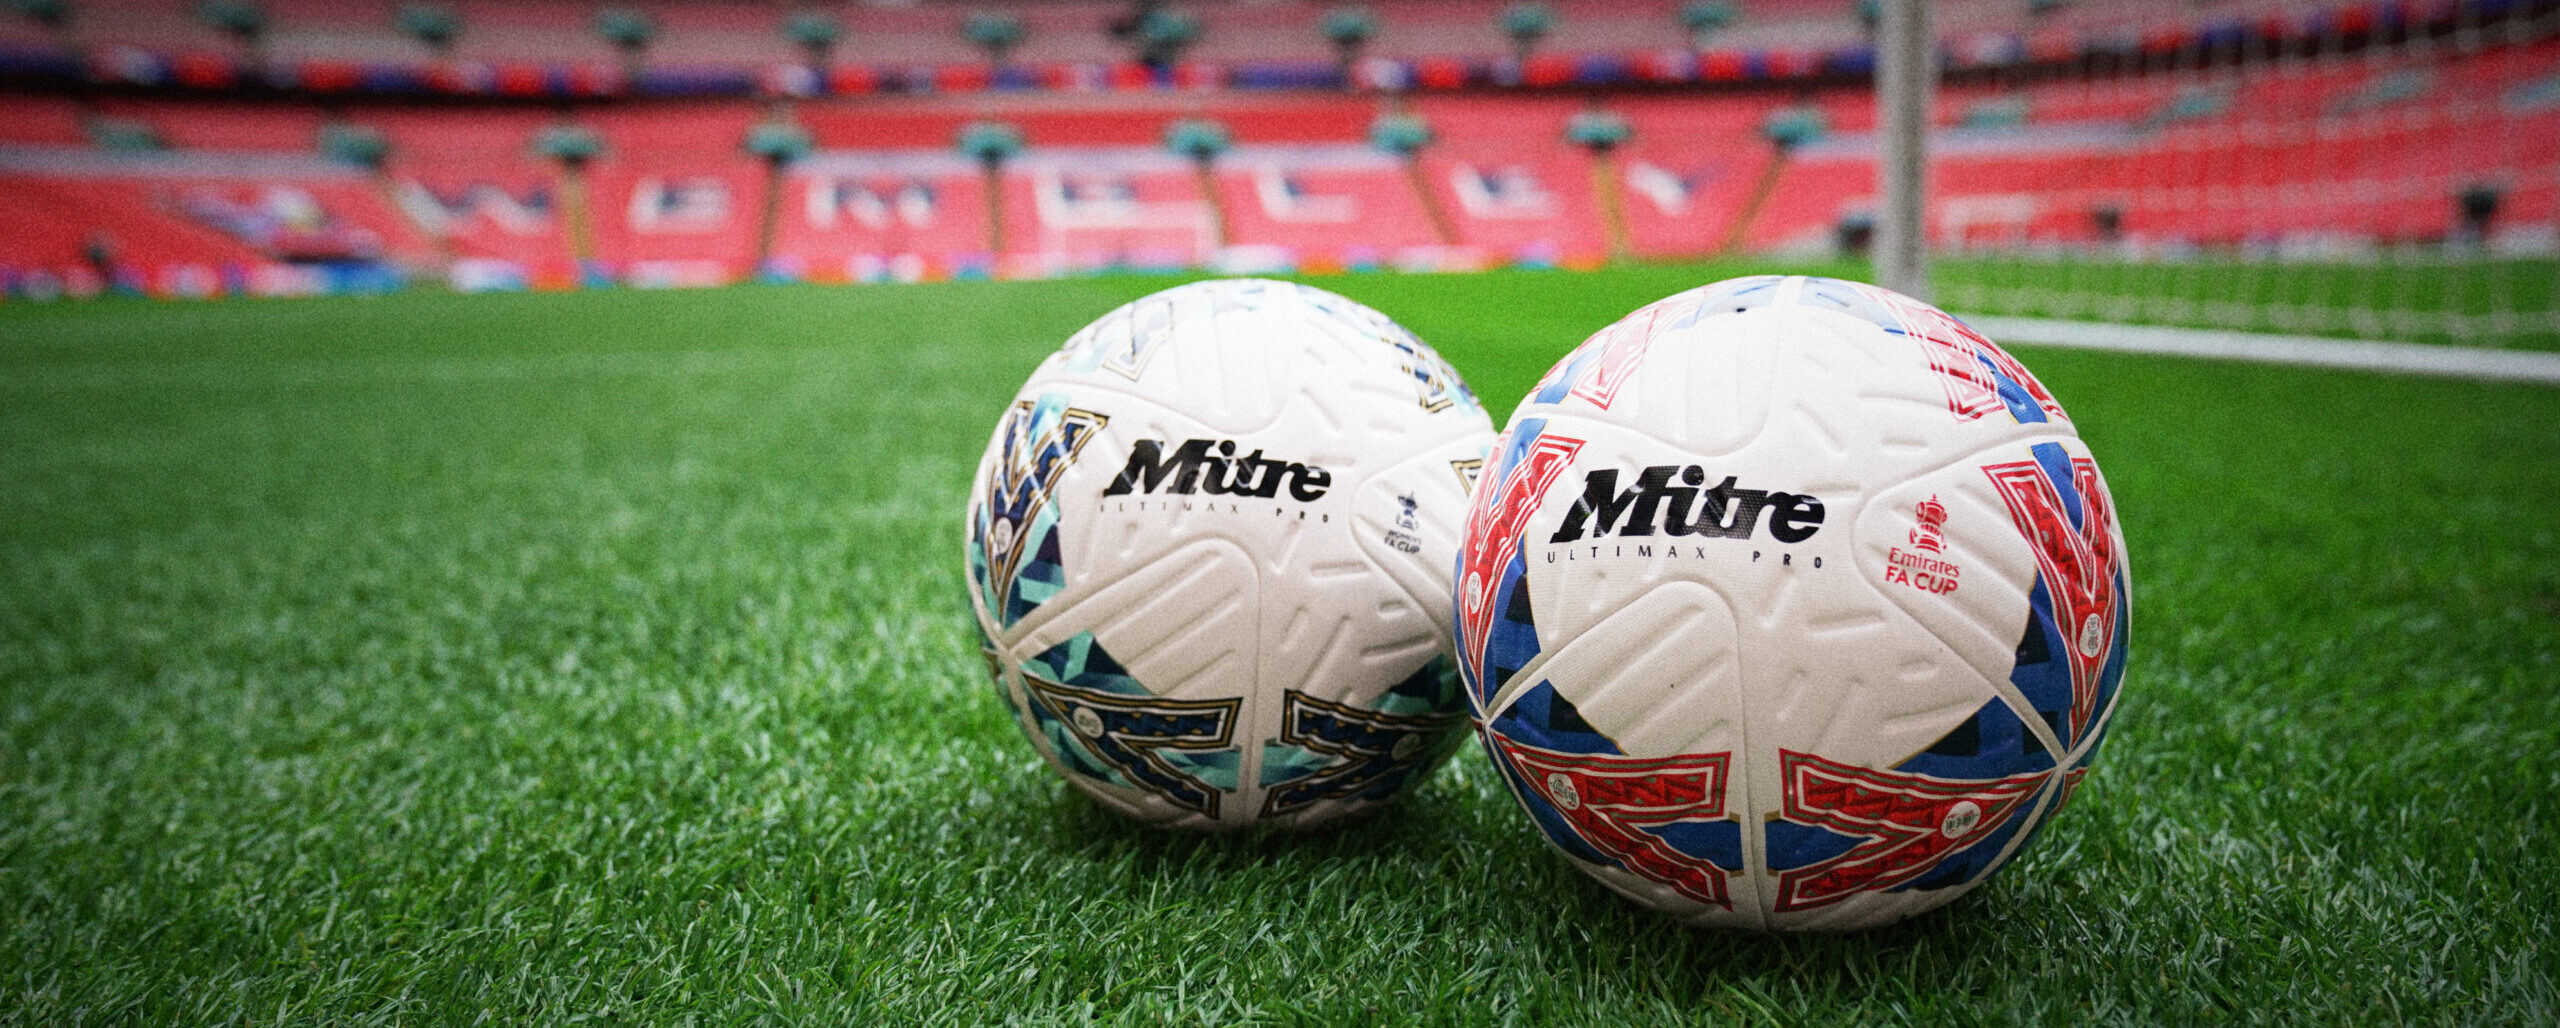 Mitre and the FA kick off new three-year partnership with fan-inspired ball designs